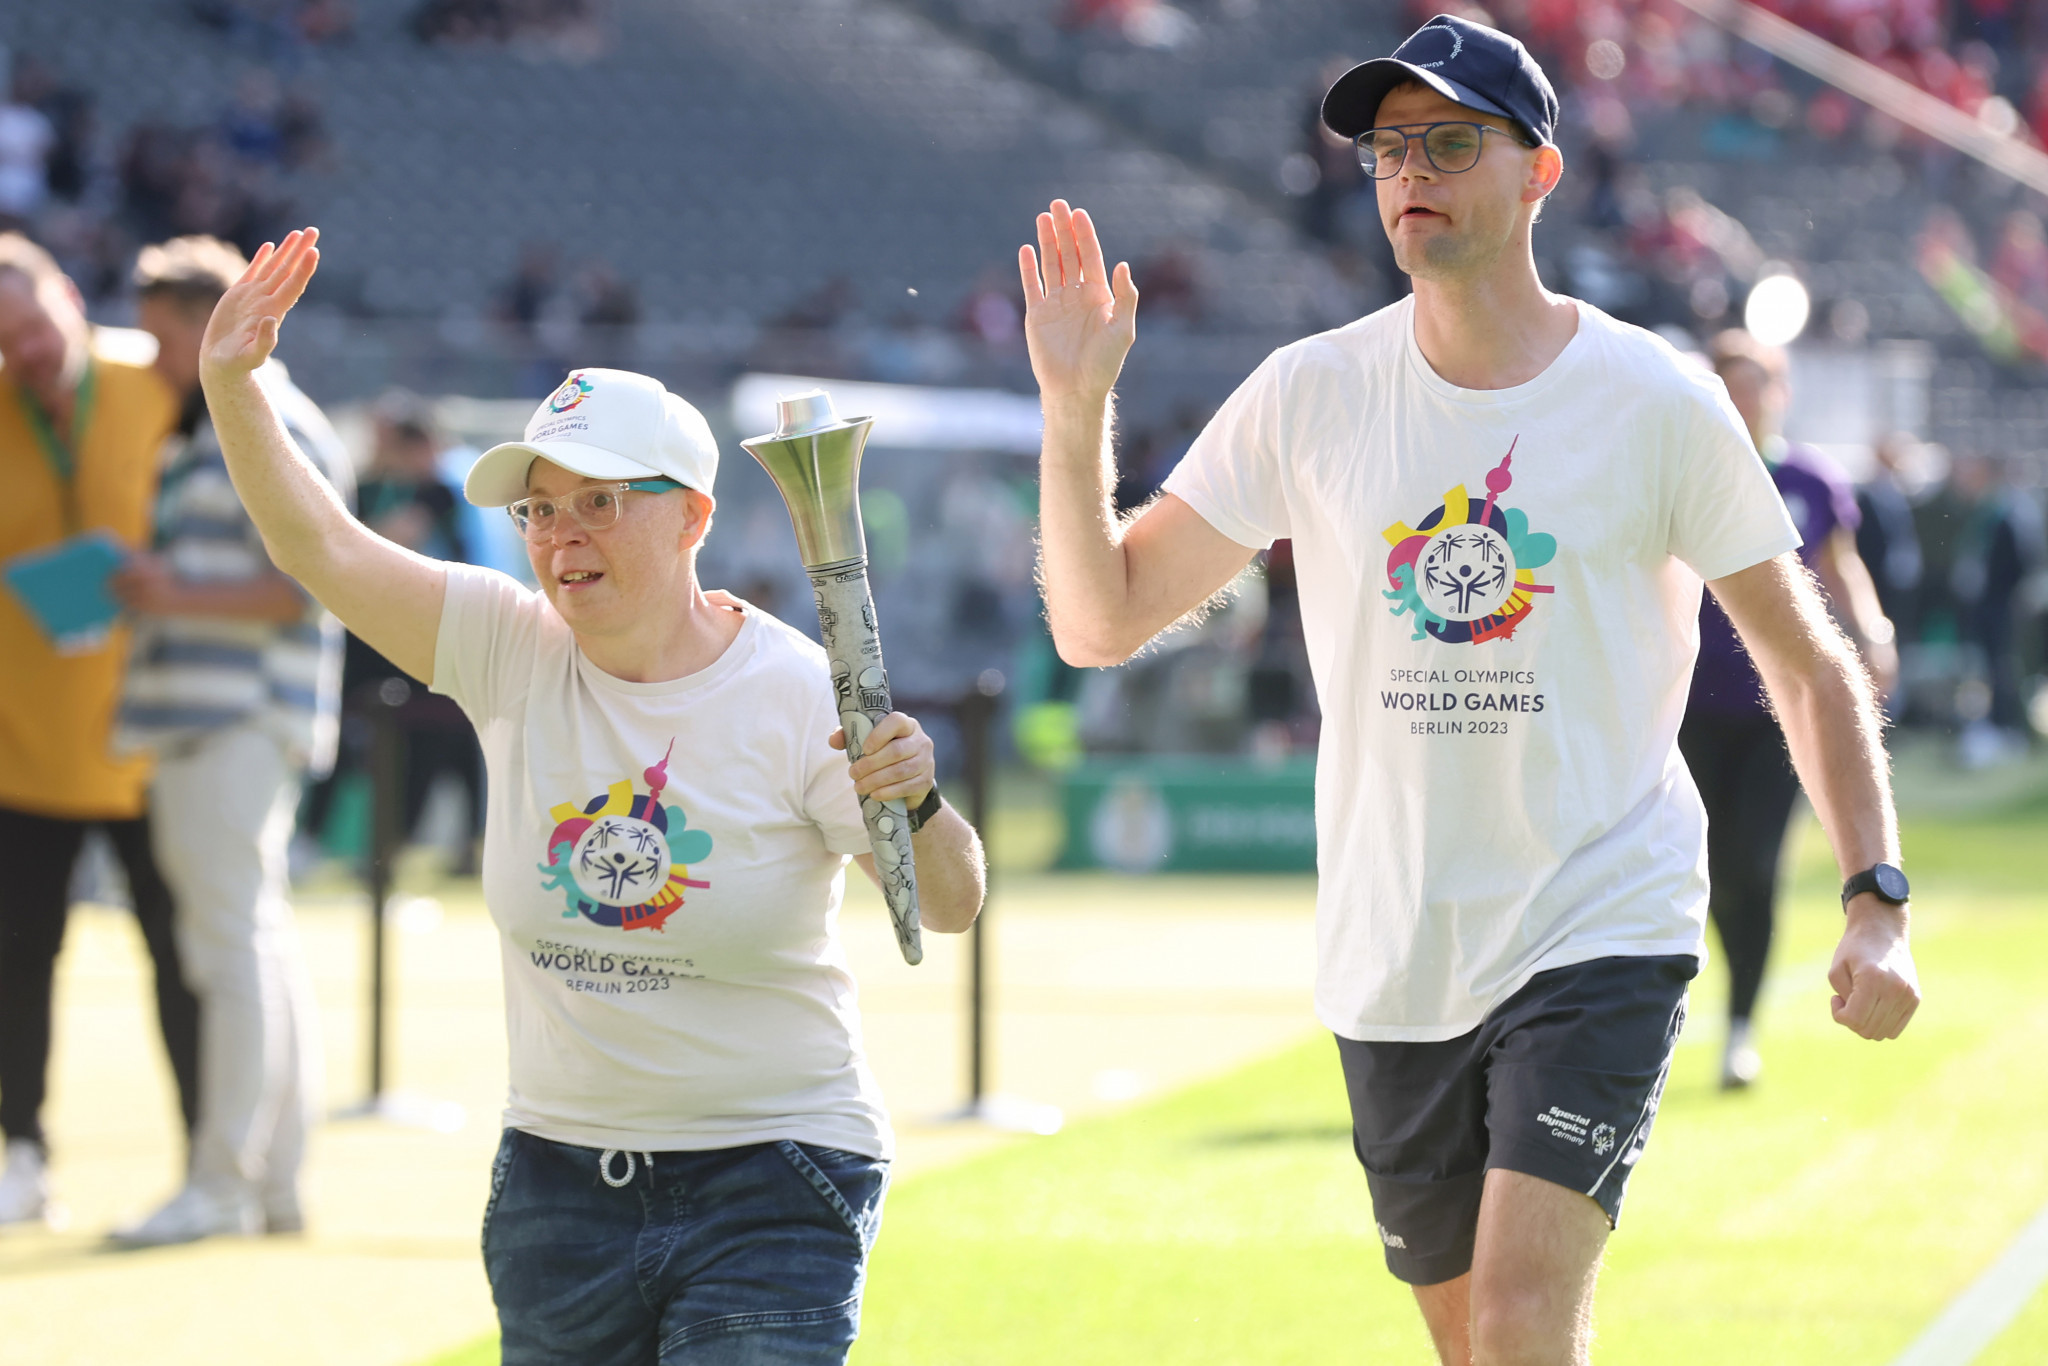 Daniela Huhn, left, and Jann Rathenow, right, with the Berlin 2023 Special Olympics World Games Torch at the DFB Cup final match between RB Leipzig and Eintracht Frankfurt on June 03 ©Getty Images 